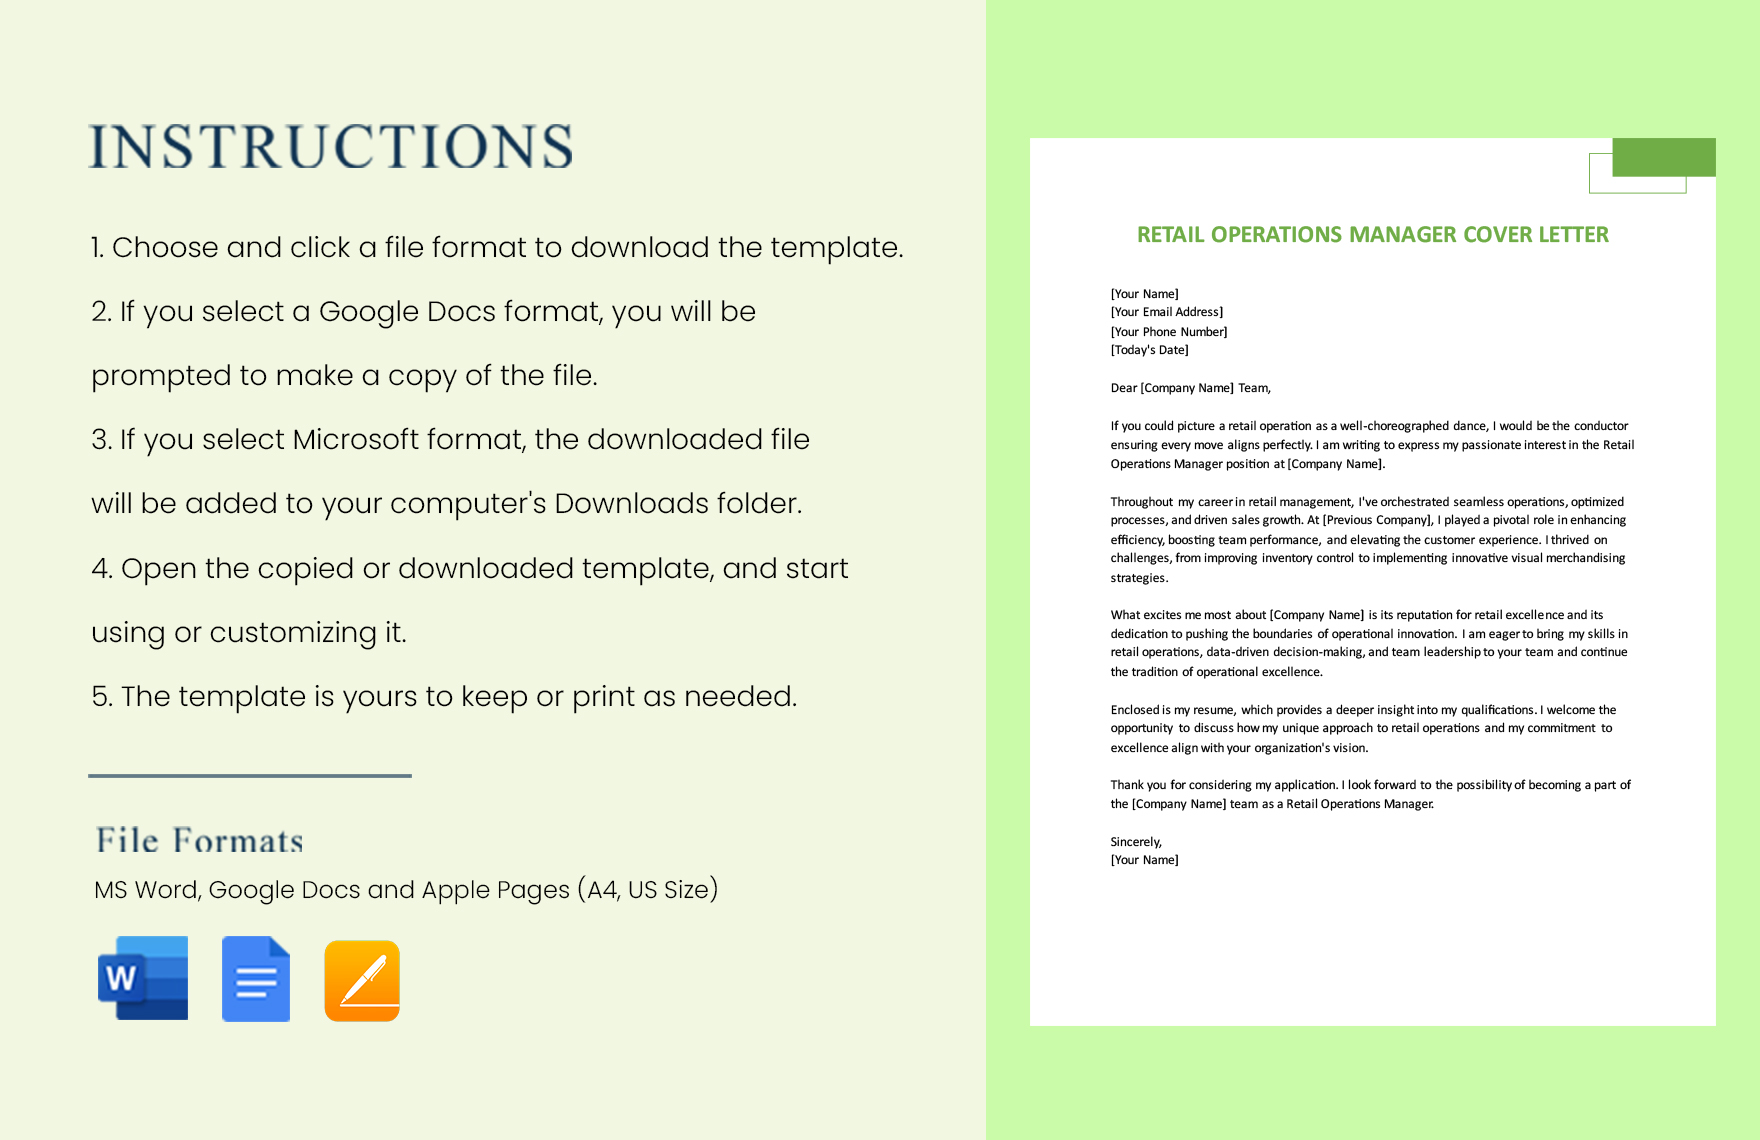 Retail Operations Manager Cover Letter